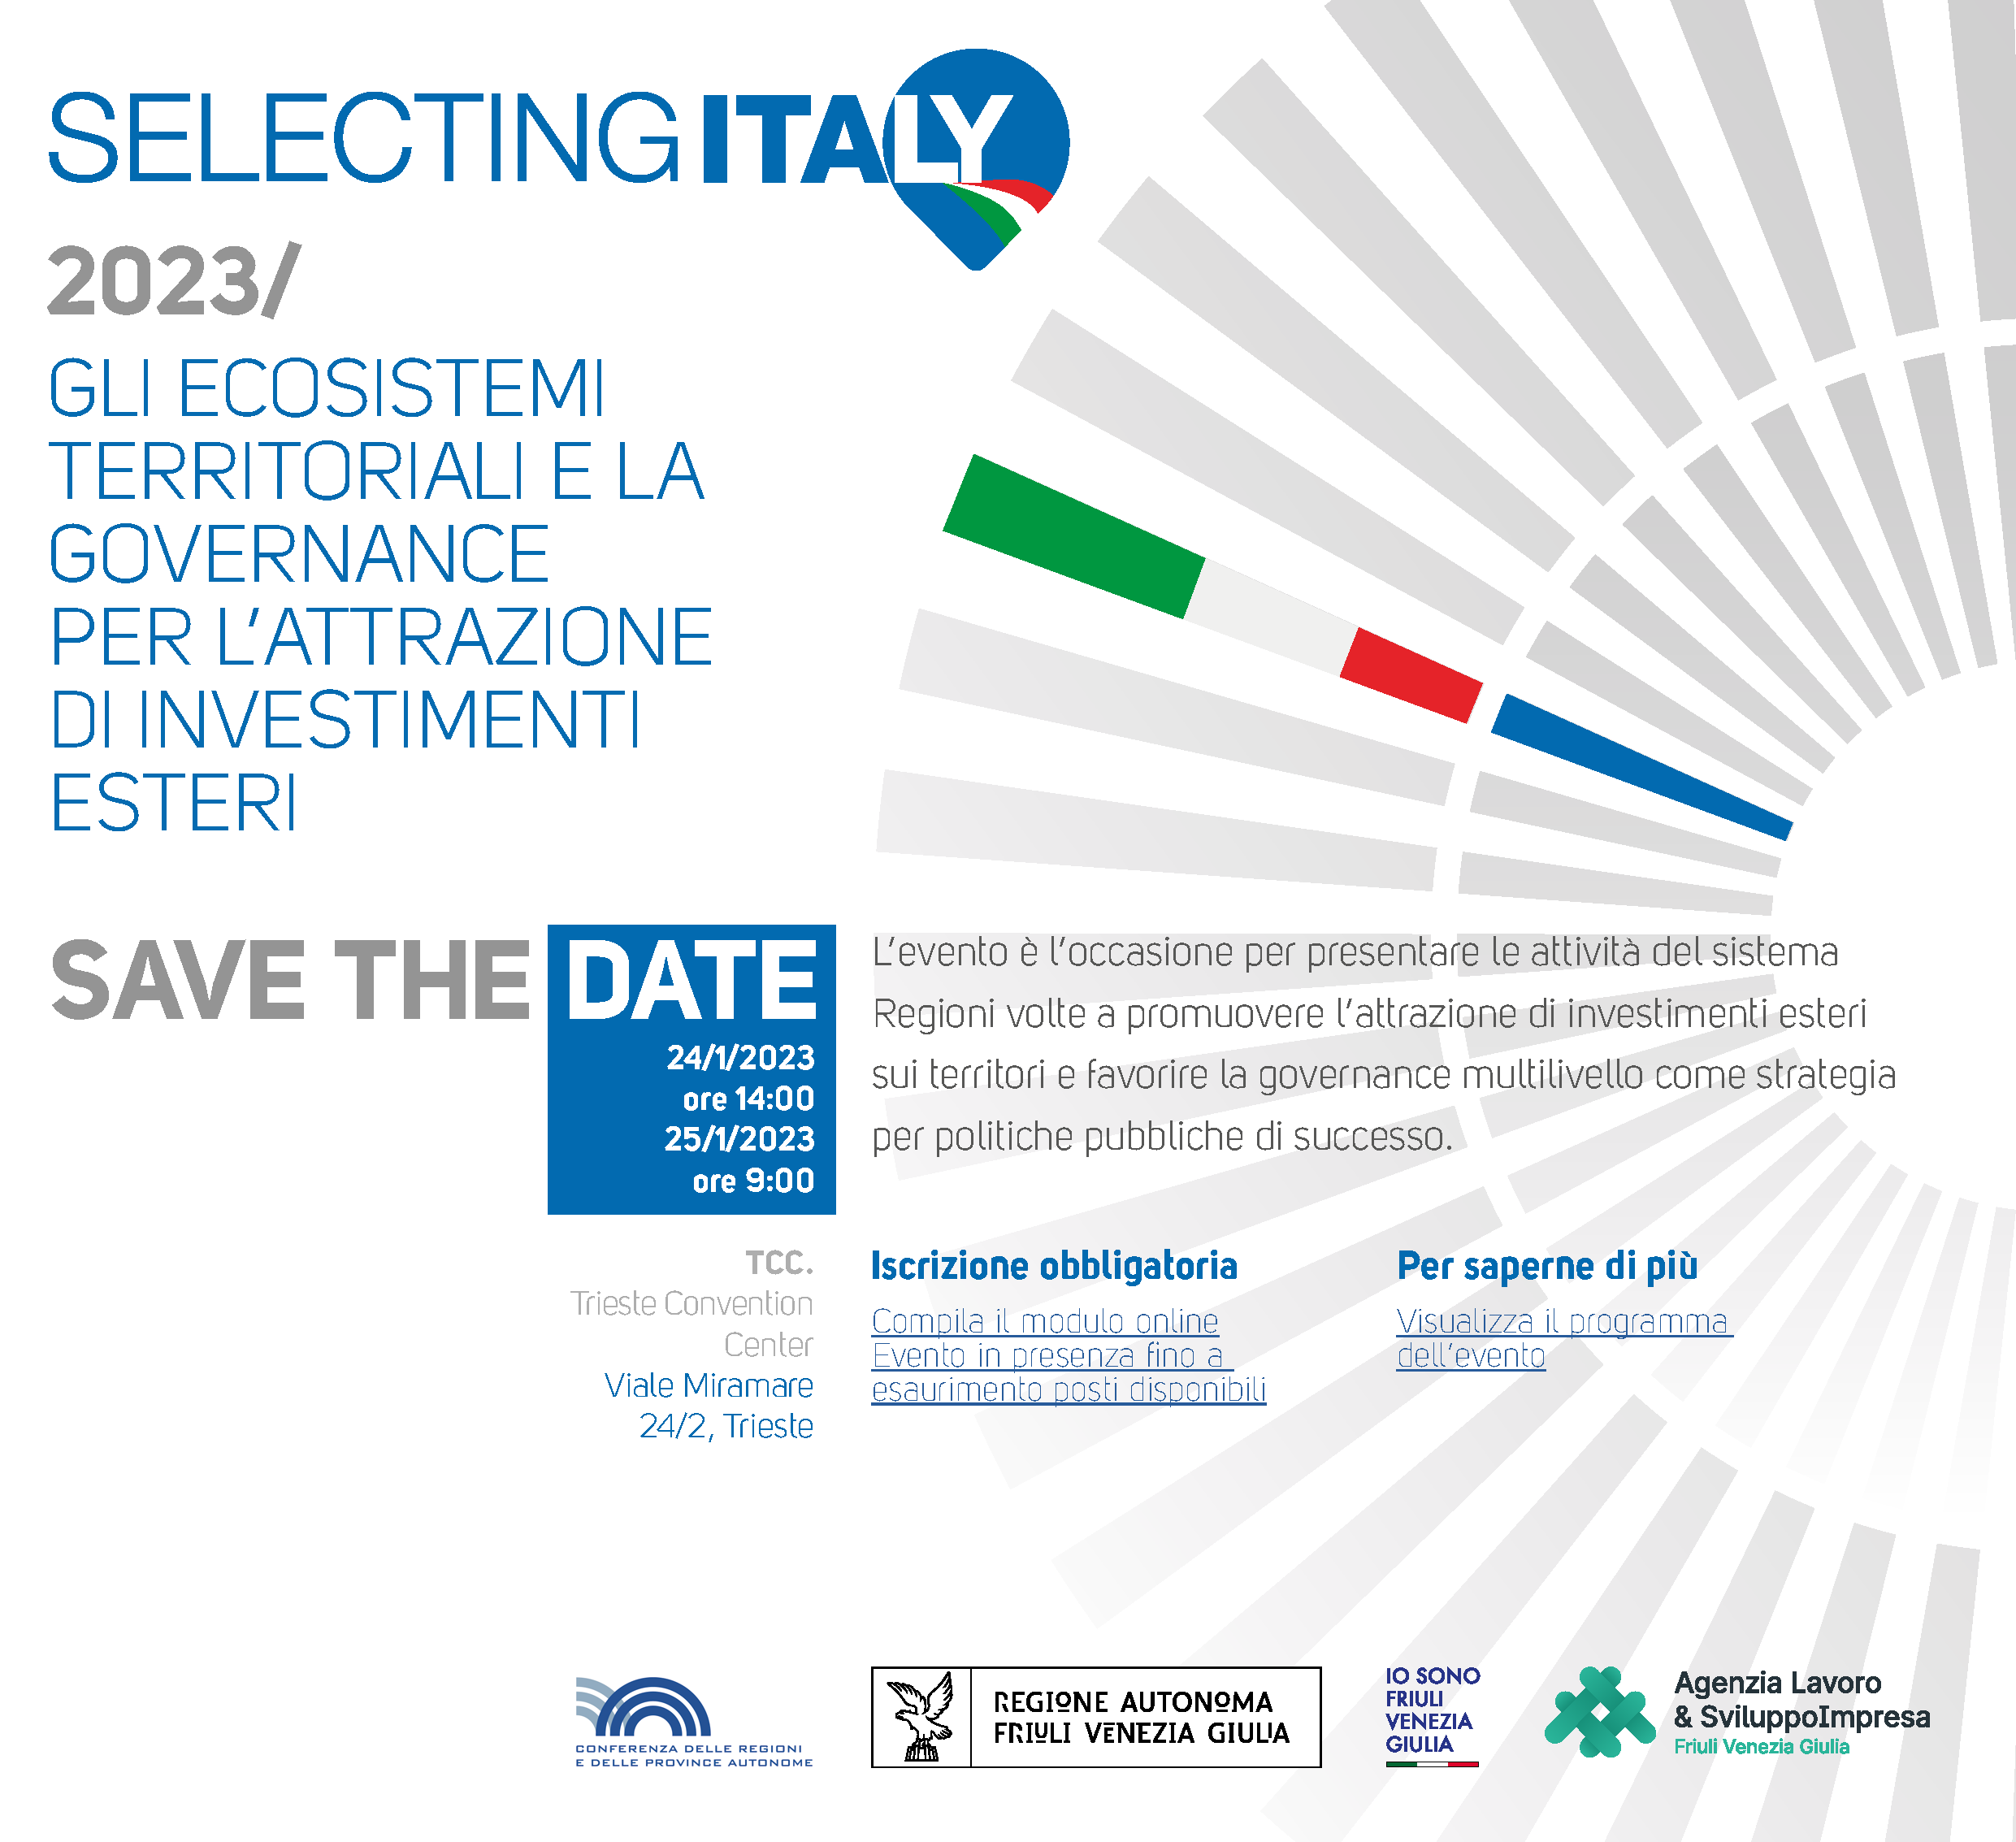 file/ELEMENTO_NEWSLETTER/25164/2031-SELECTING-ITALY-SAVE-THE-DATE_16-save-def_12_2_23.png